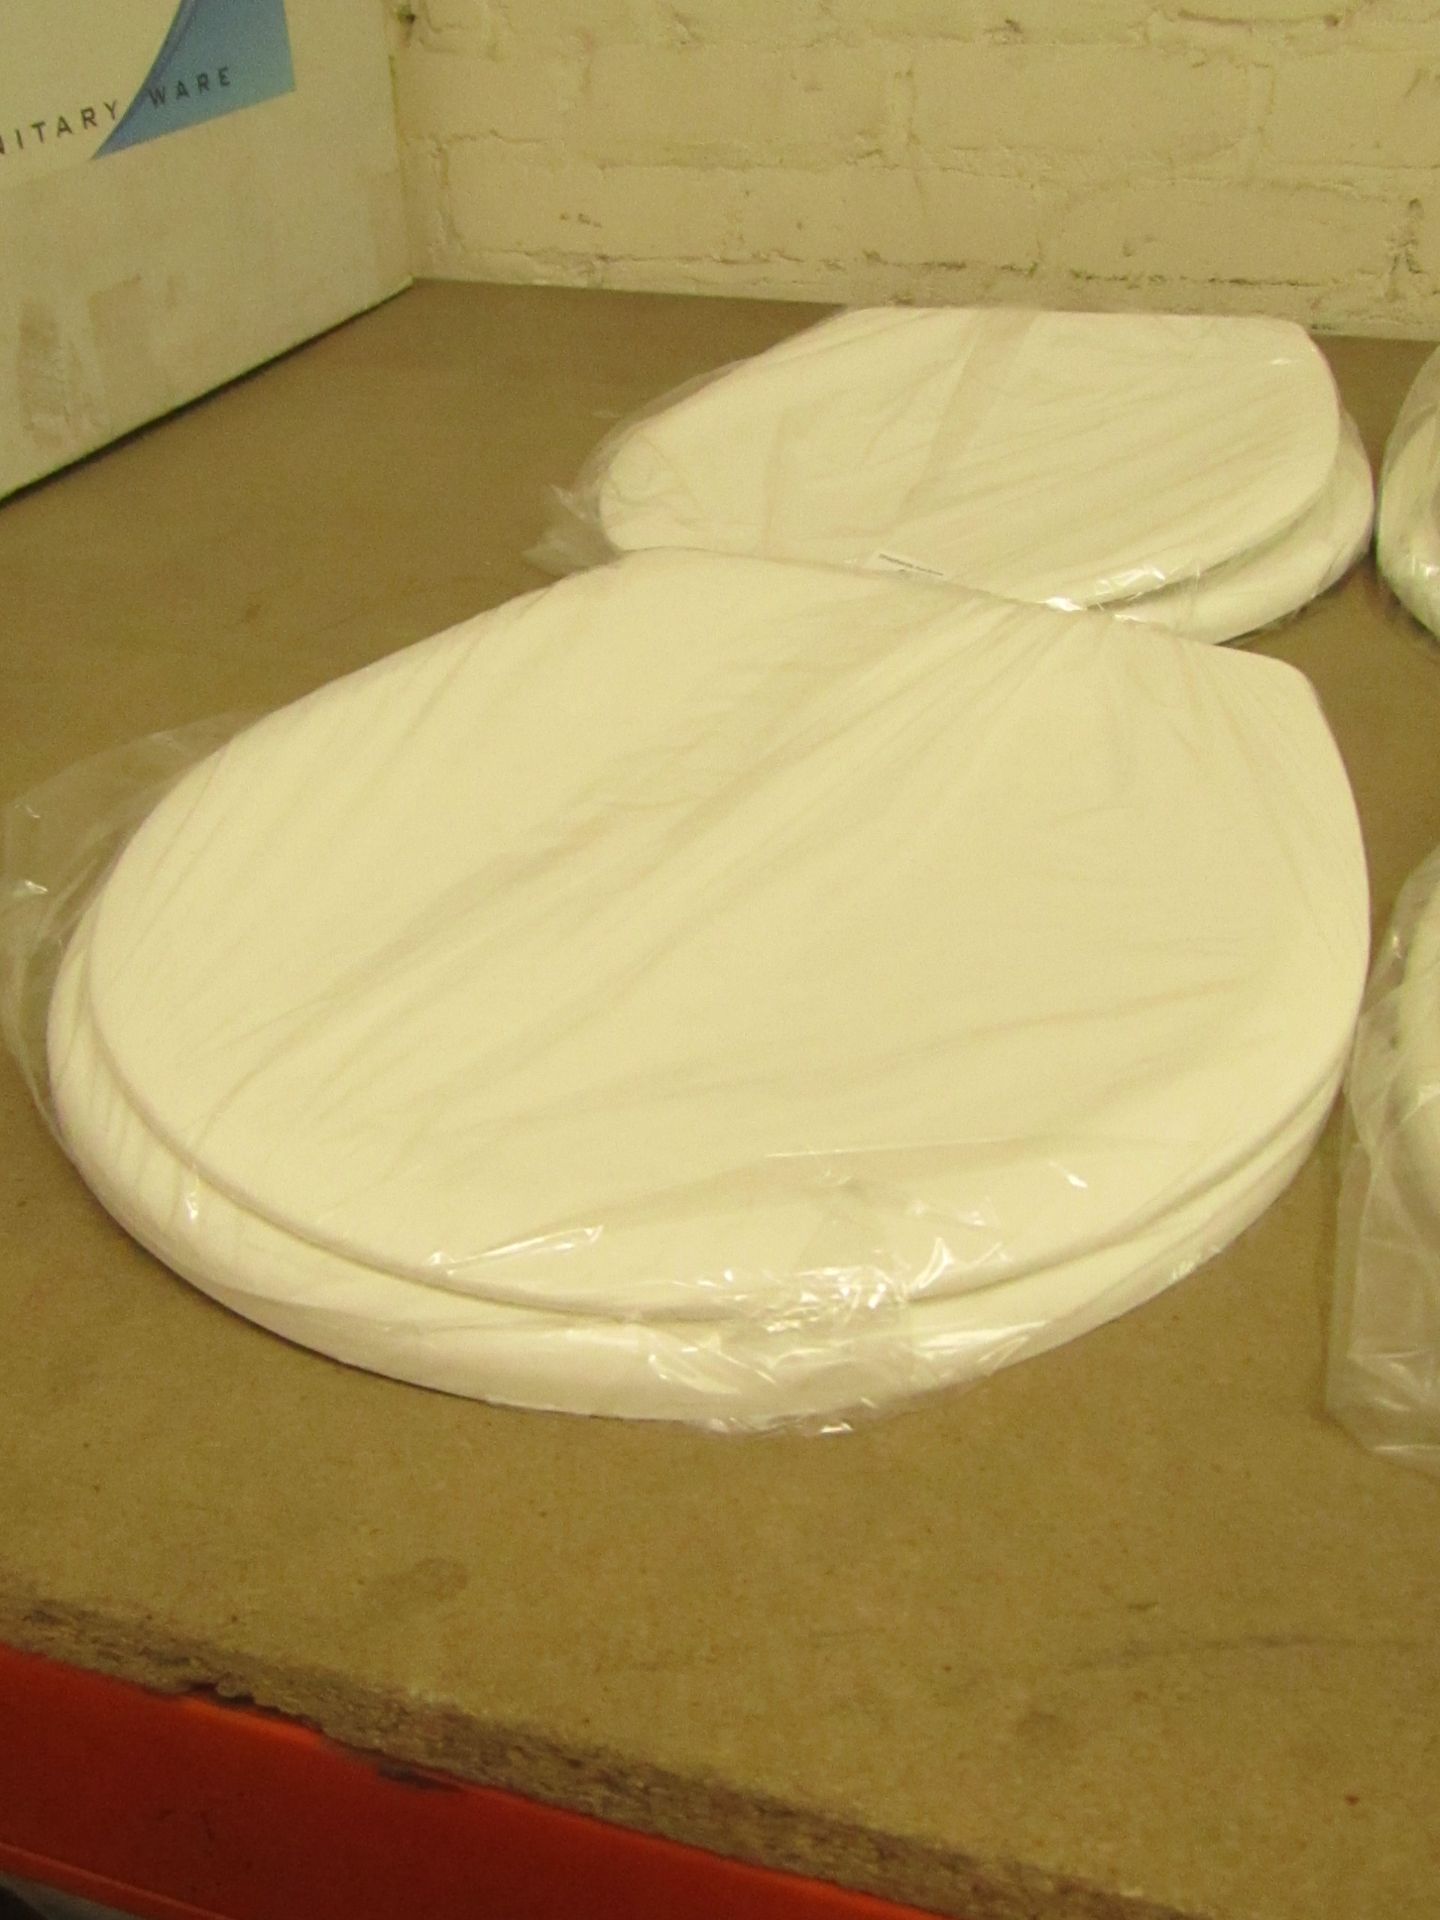 Cream coloured plastic toilet seat with fixings. New in packaging.